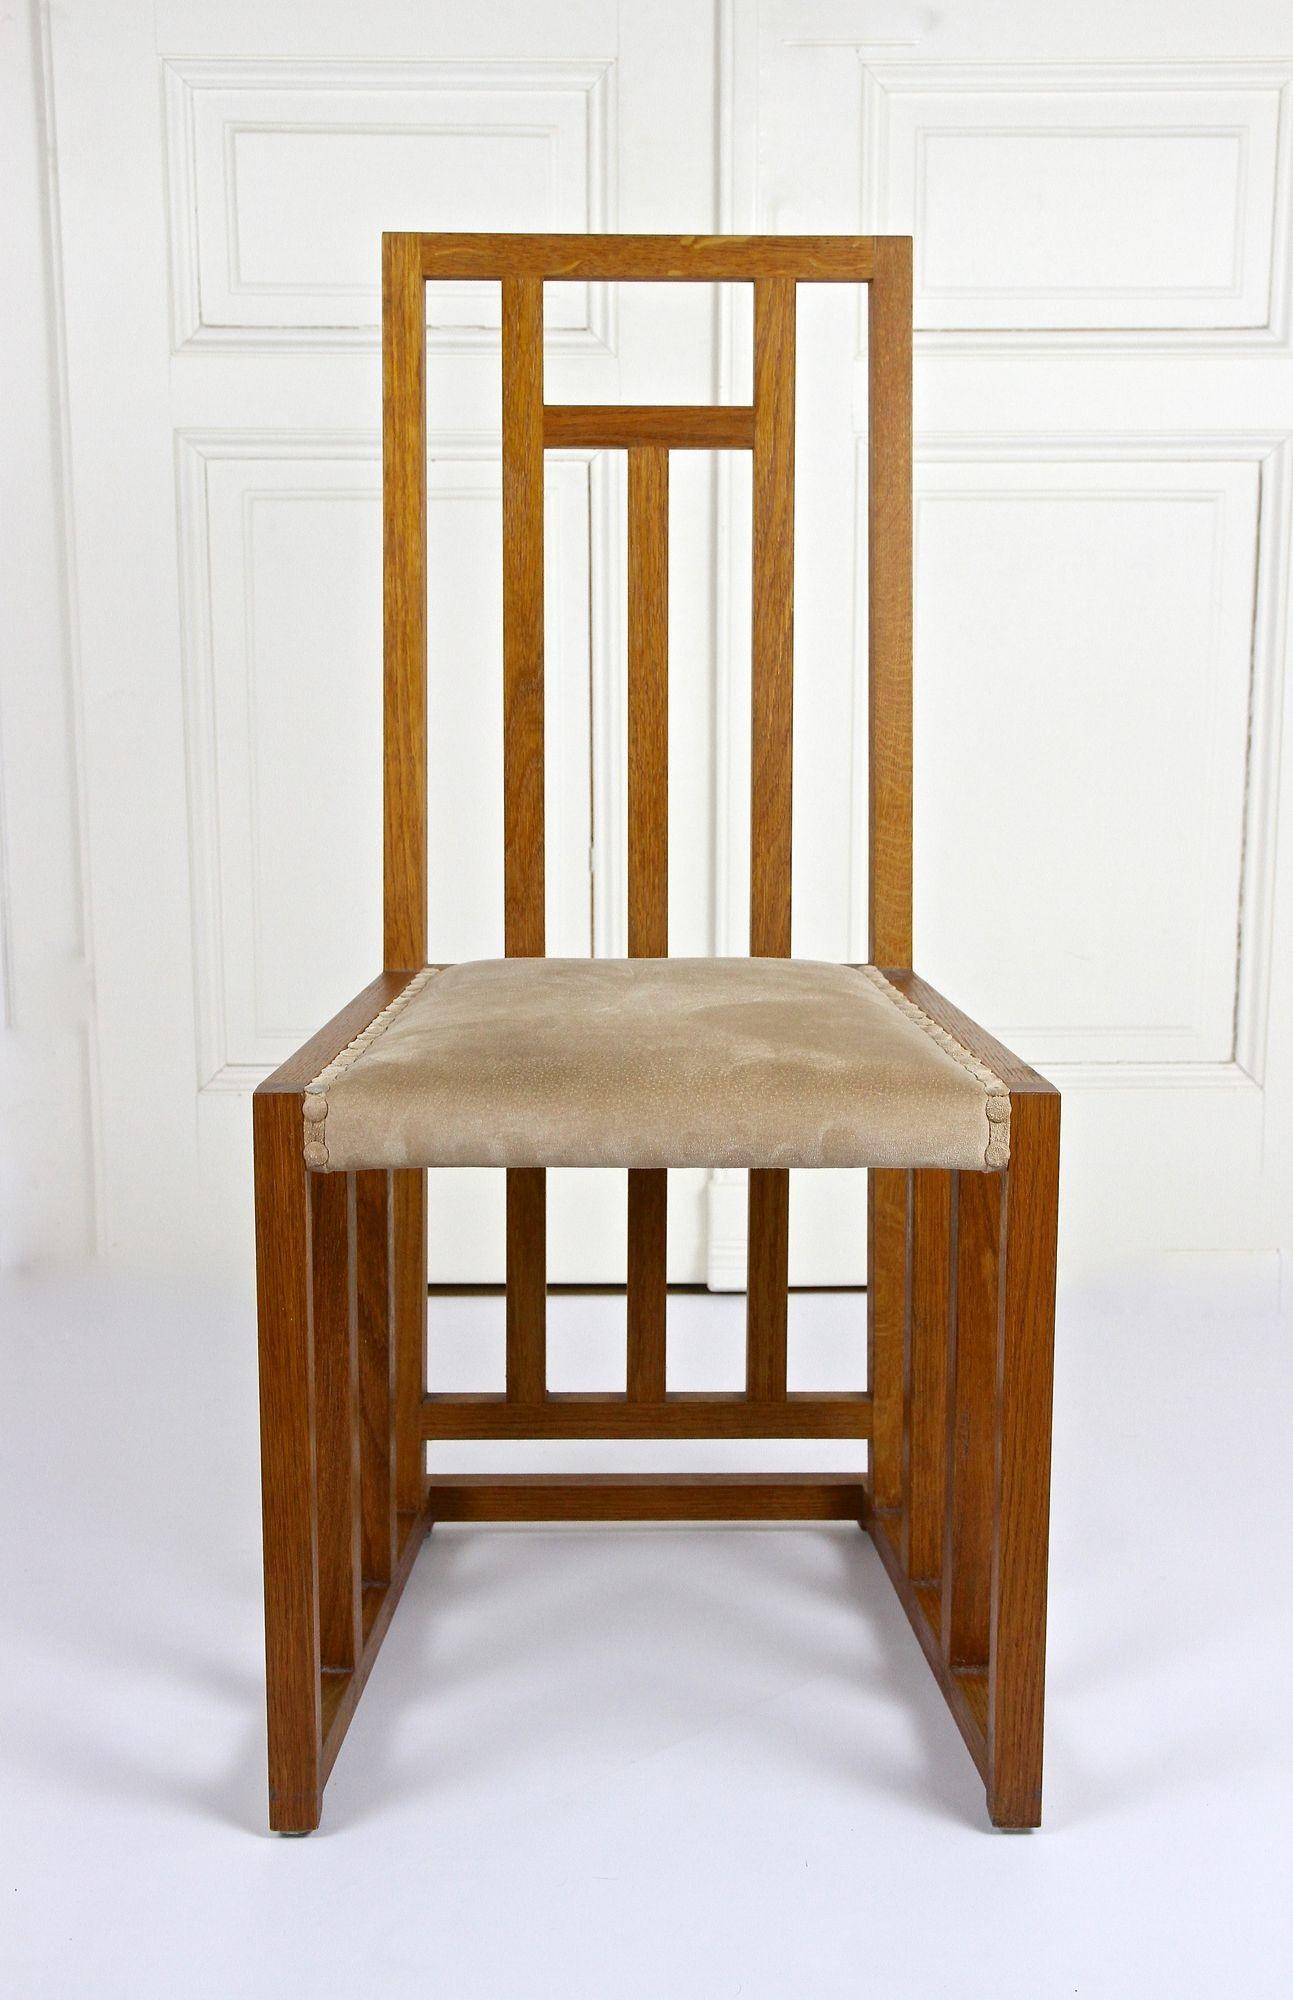 Suede Set Of 6 Art Nouveau Dining Chairs by Josef Hoffmann, 20th Century, AT ca. 1901 For Sale